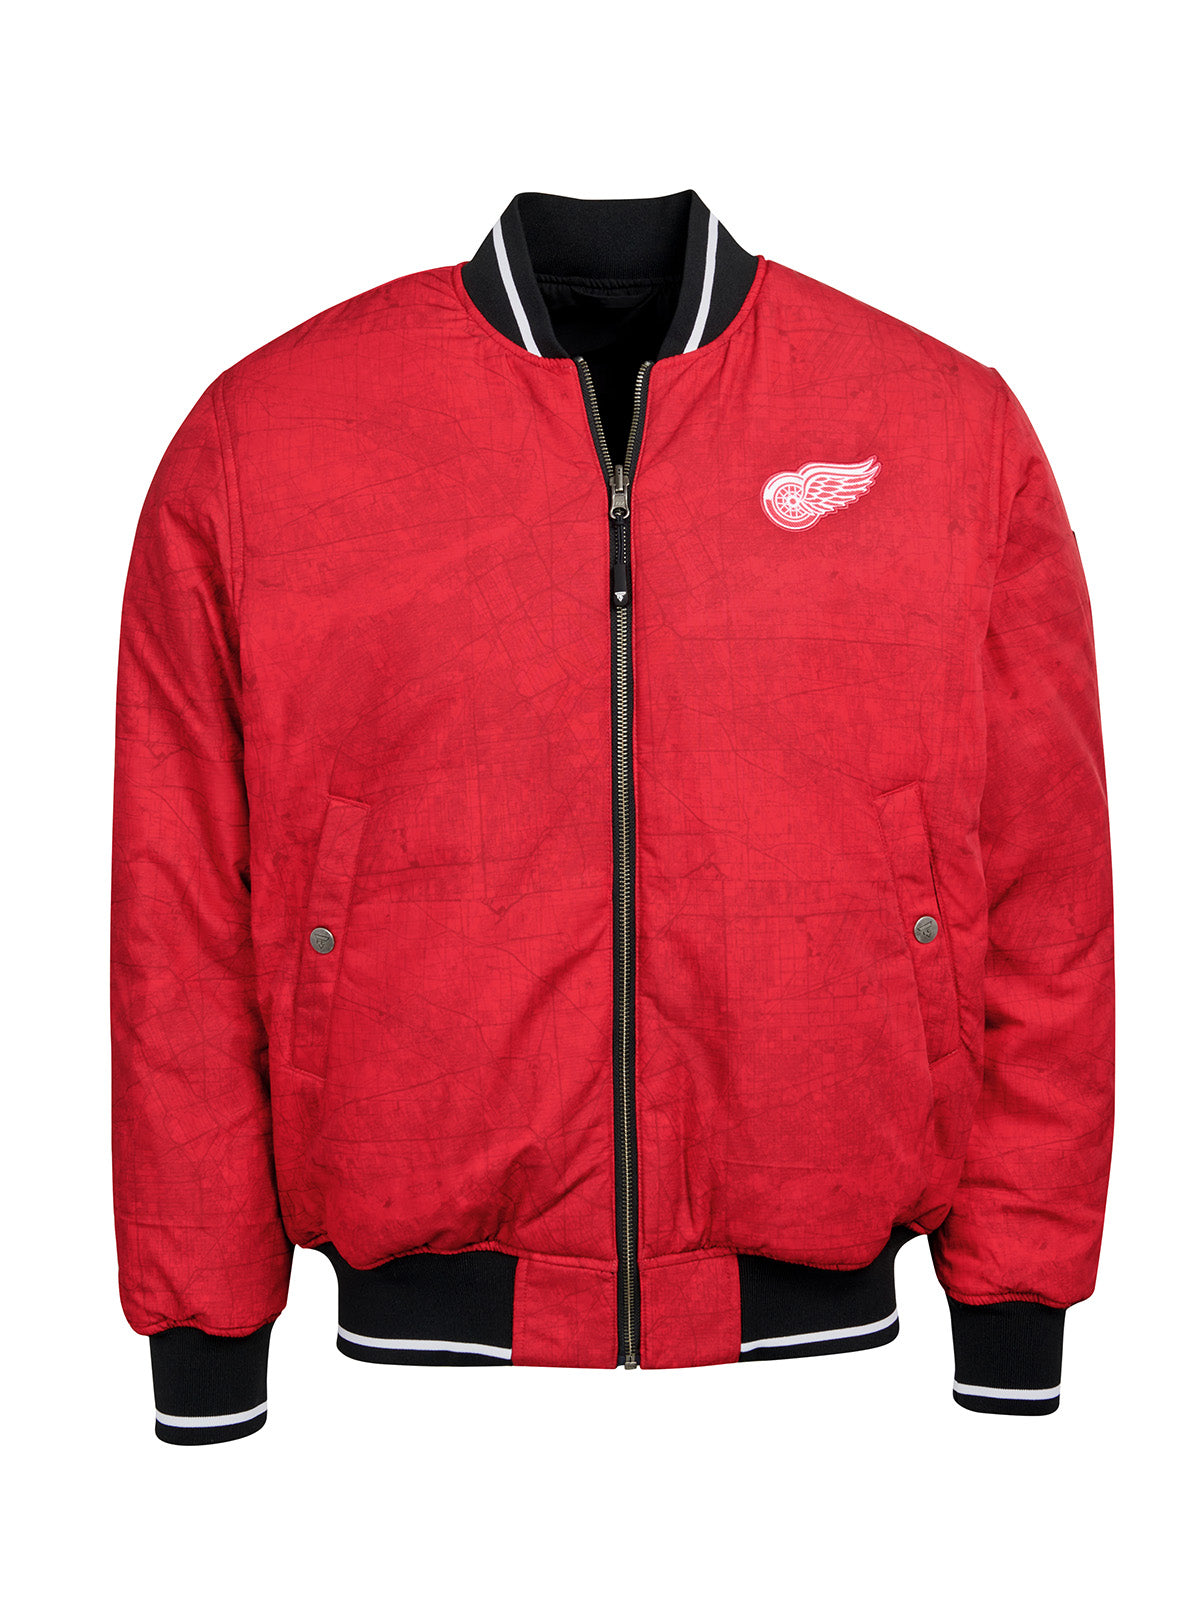 Detroit Red Wings Bomber - Reversible bomber jacket featuring the iconic Detroit Red Wings logo with ribbed cuffs, collar and hem in the team colors